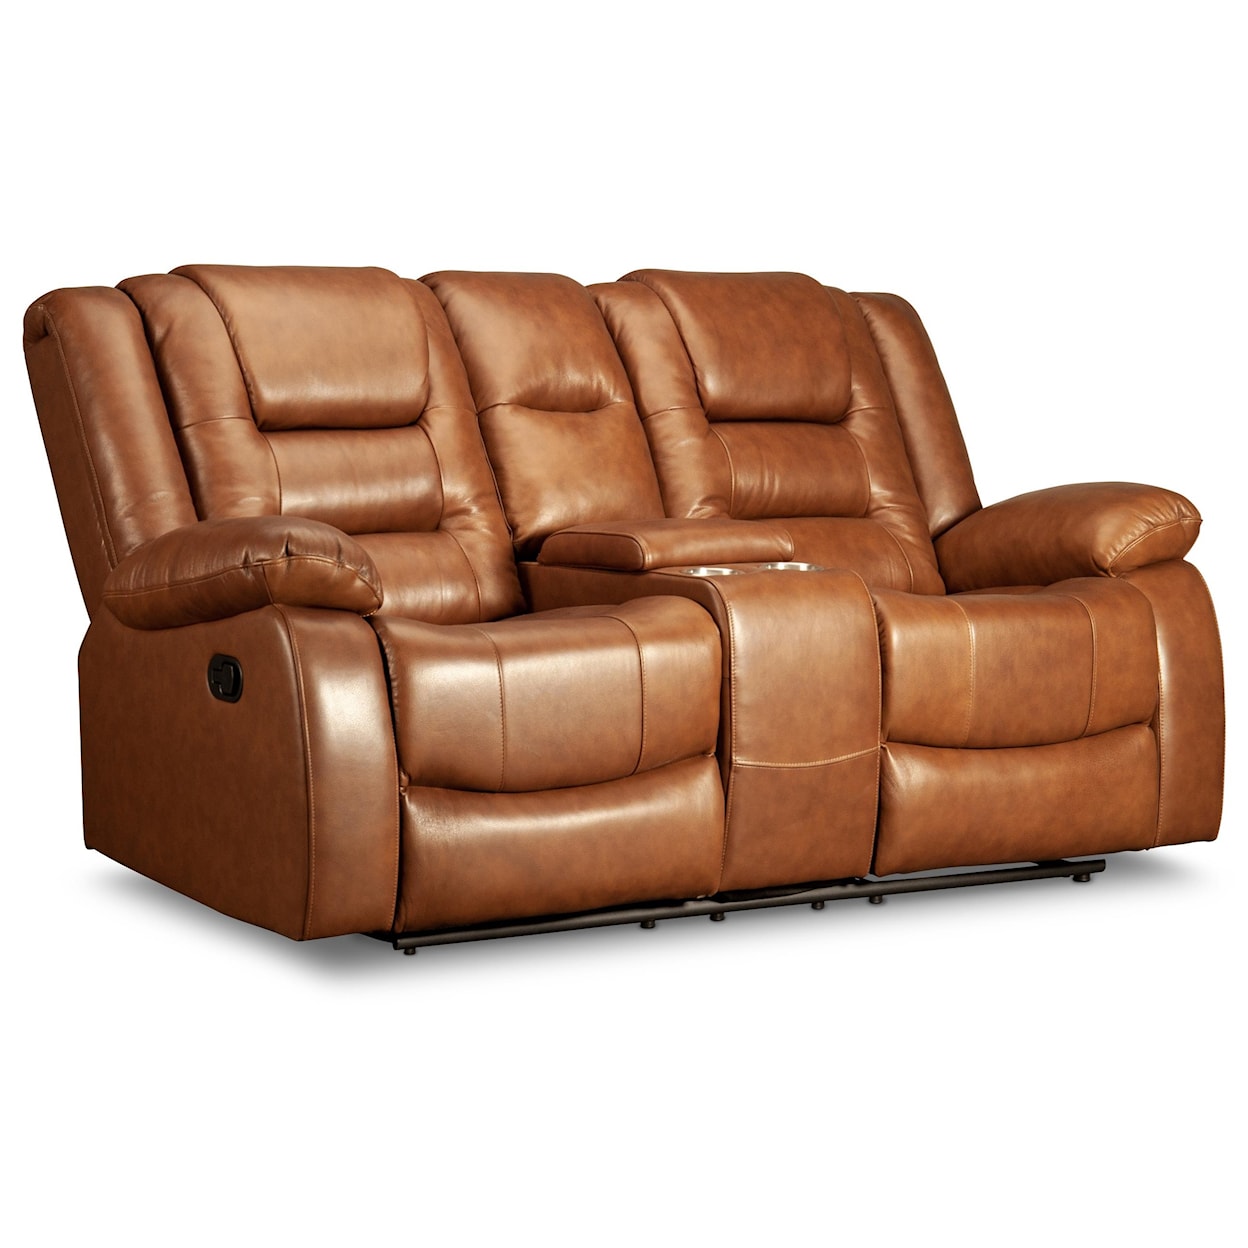 Vogue Home Furnishings Tully Tully Leather Match Reclining Loveseat